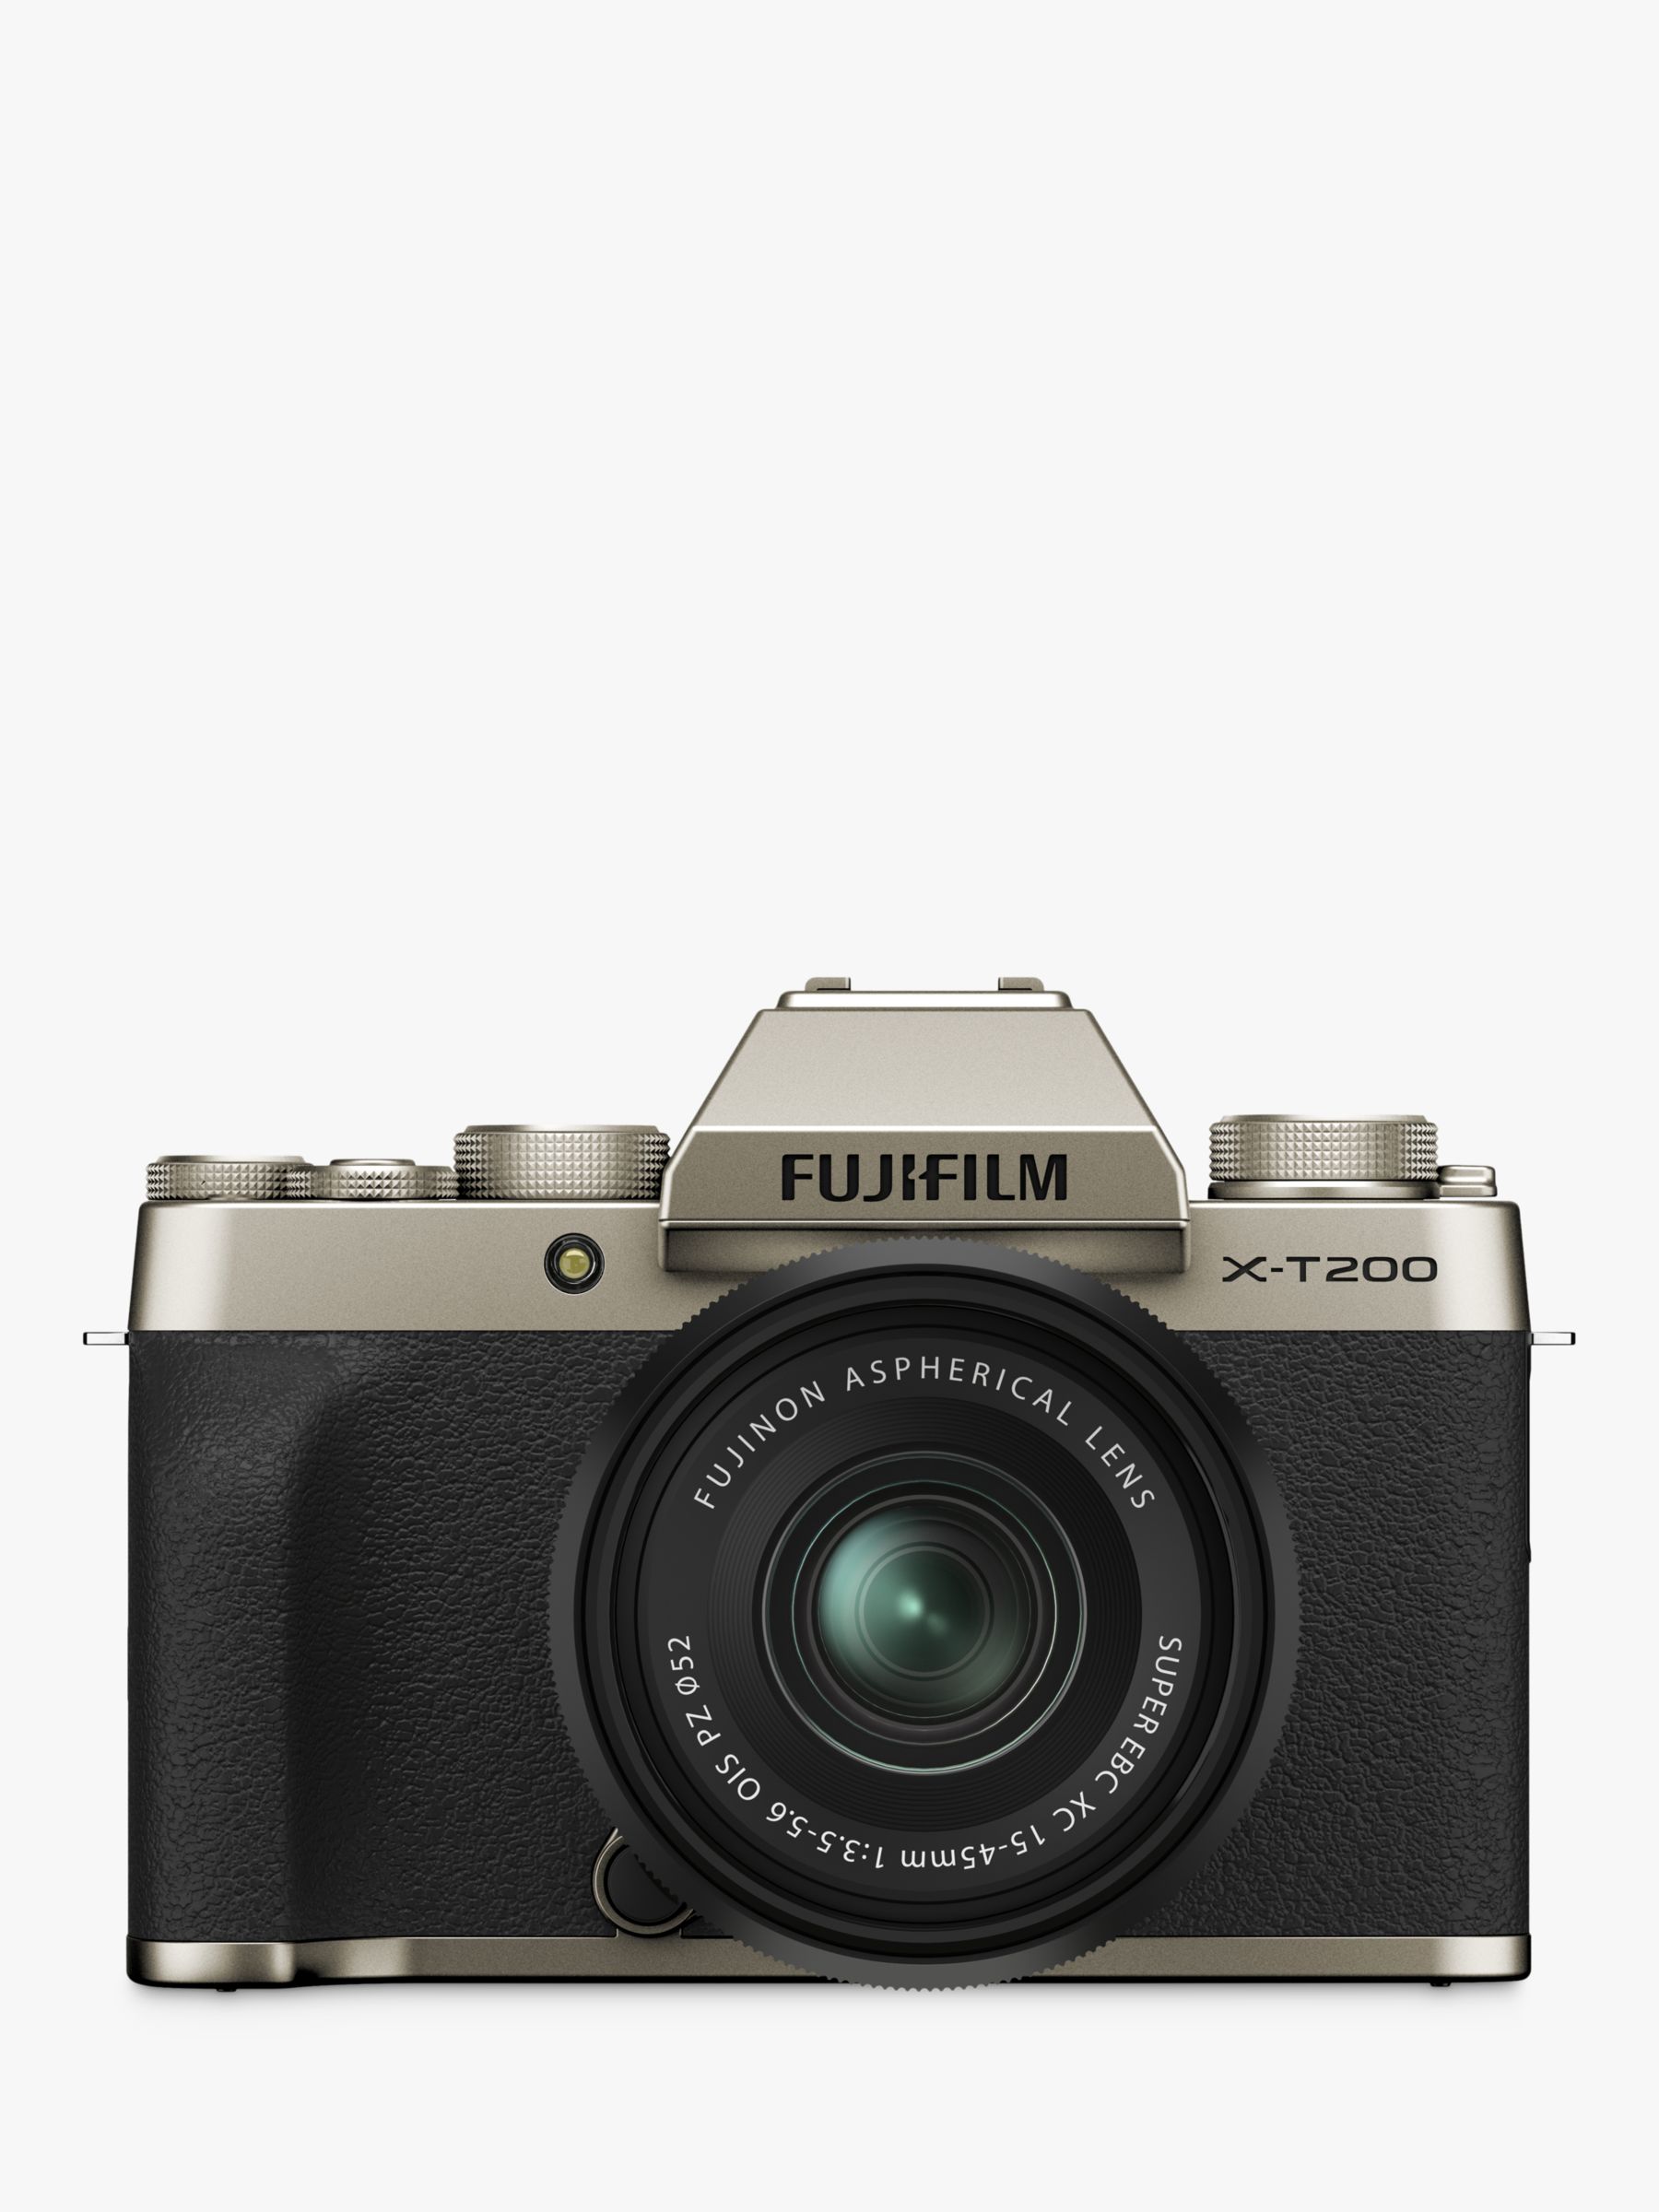 Image of Fujifilm XT200 Compact System Camera with 1545mm XC Lens 4K Ultra HD 242MP WiFi Bluetooth EVF 35 Variangle Touch Screen